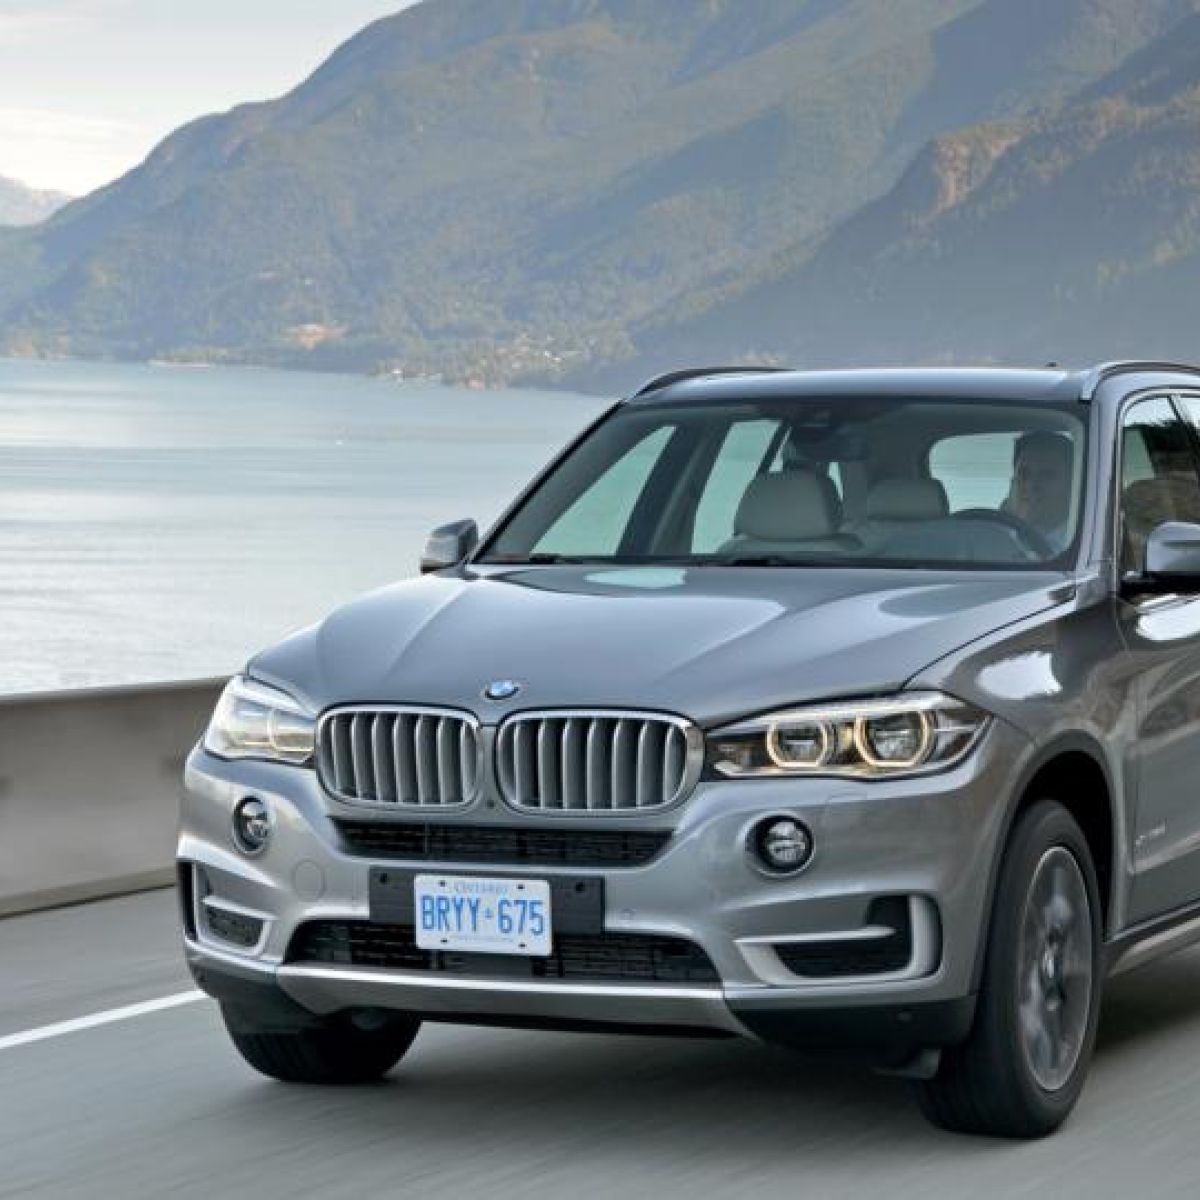 Boss' – BMW X5 delivers a classic hit